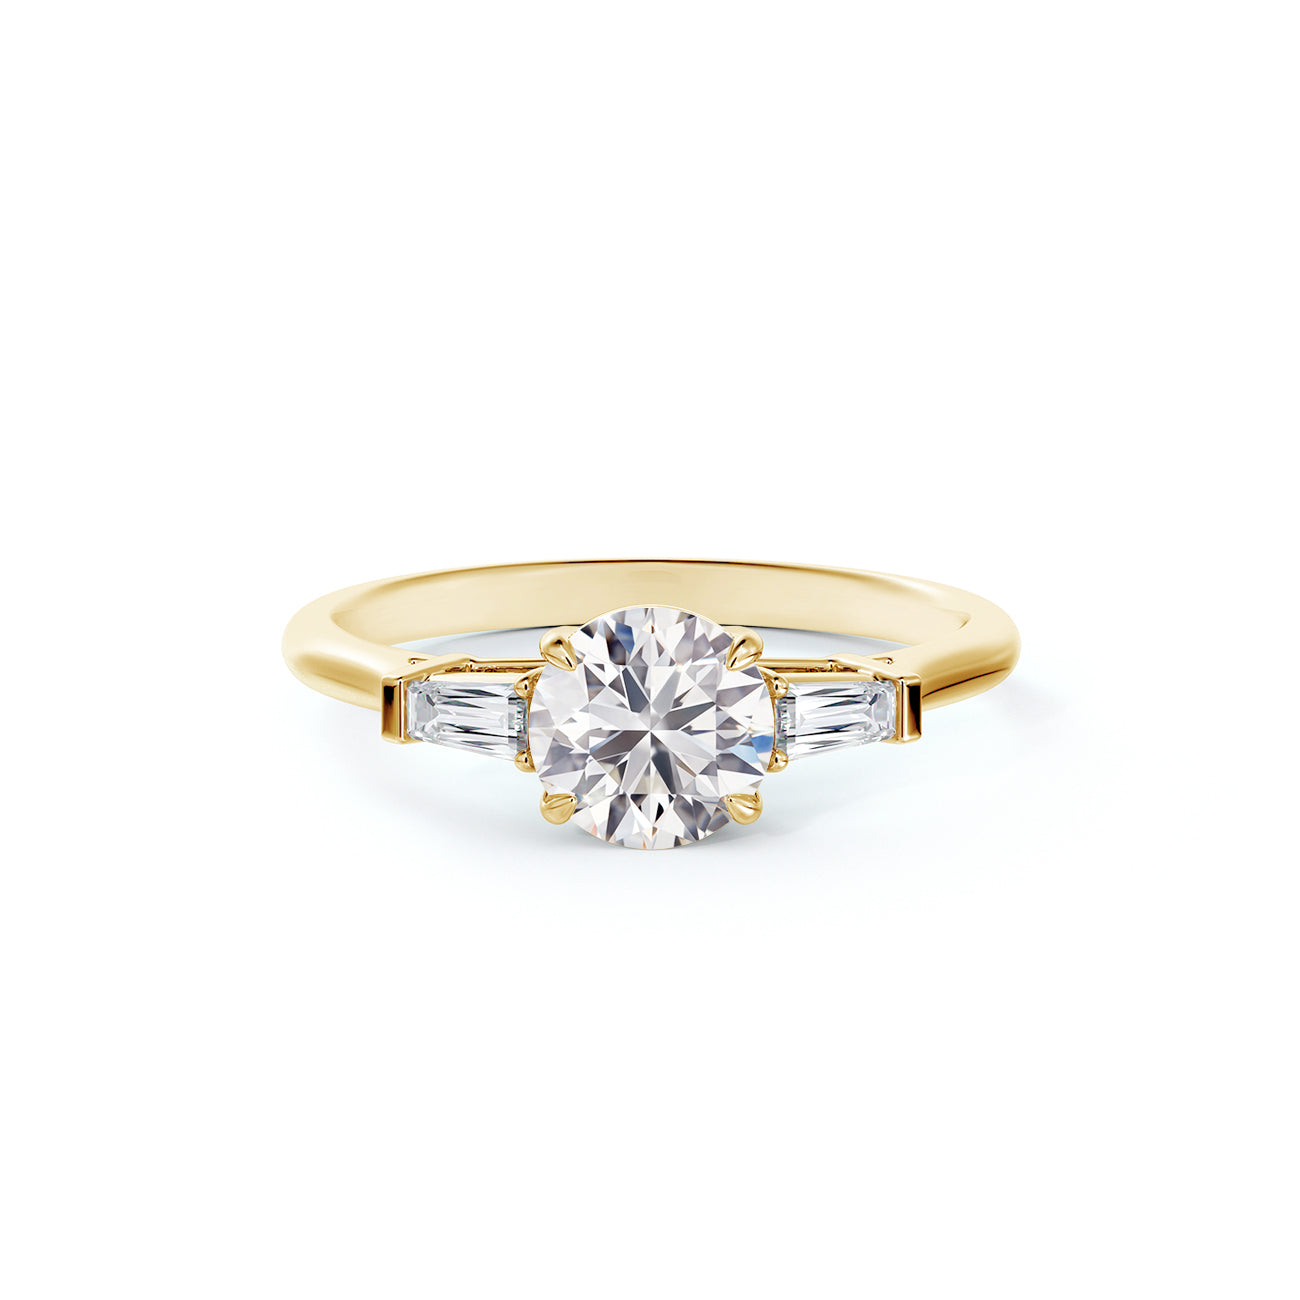 De Beers Forevermark Round Brilliant Engagement Ring With Tapered Baguettes